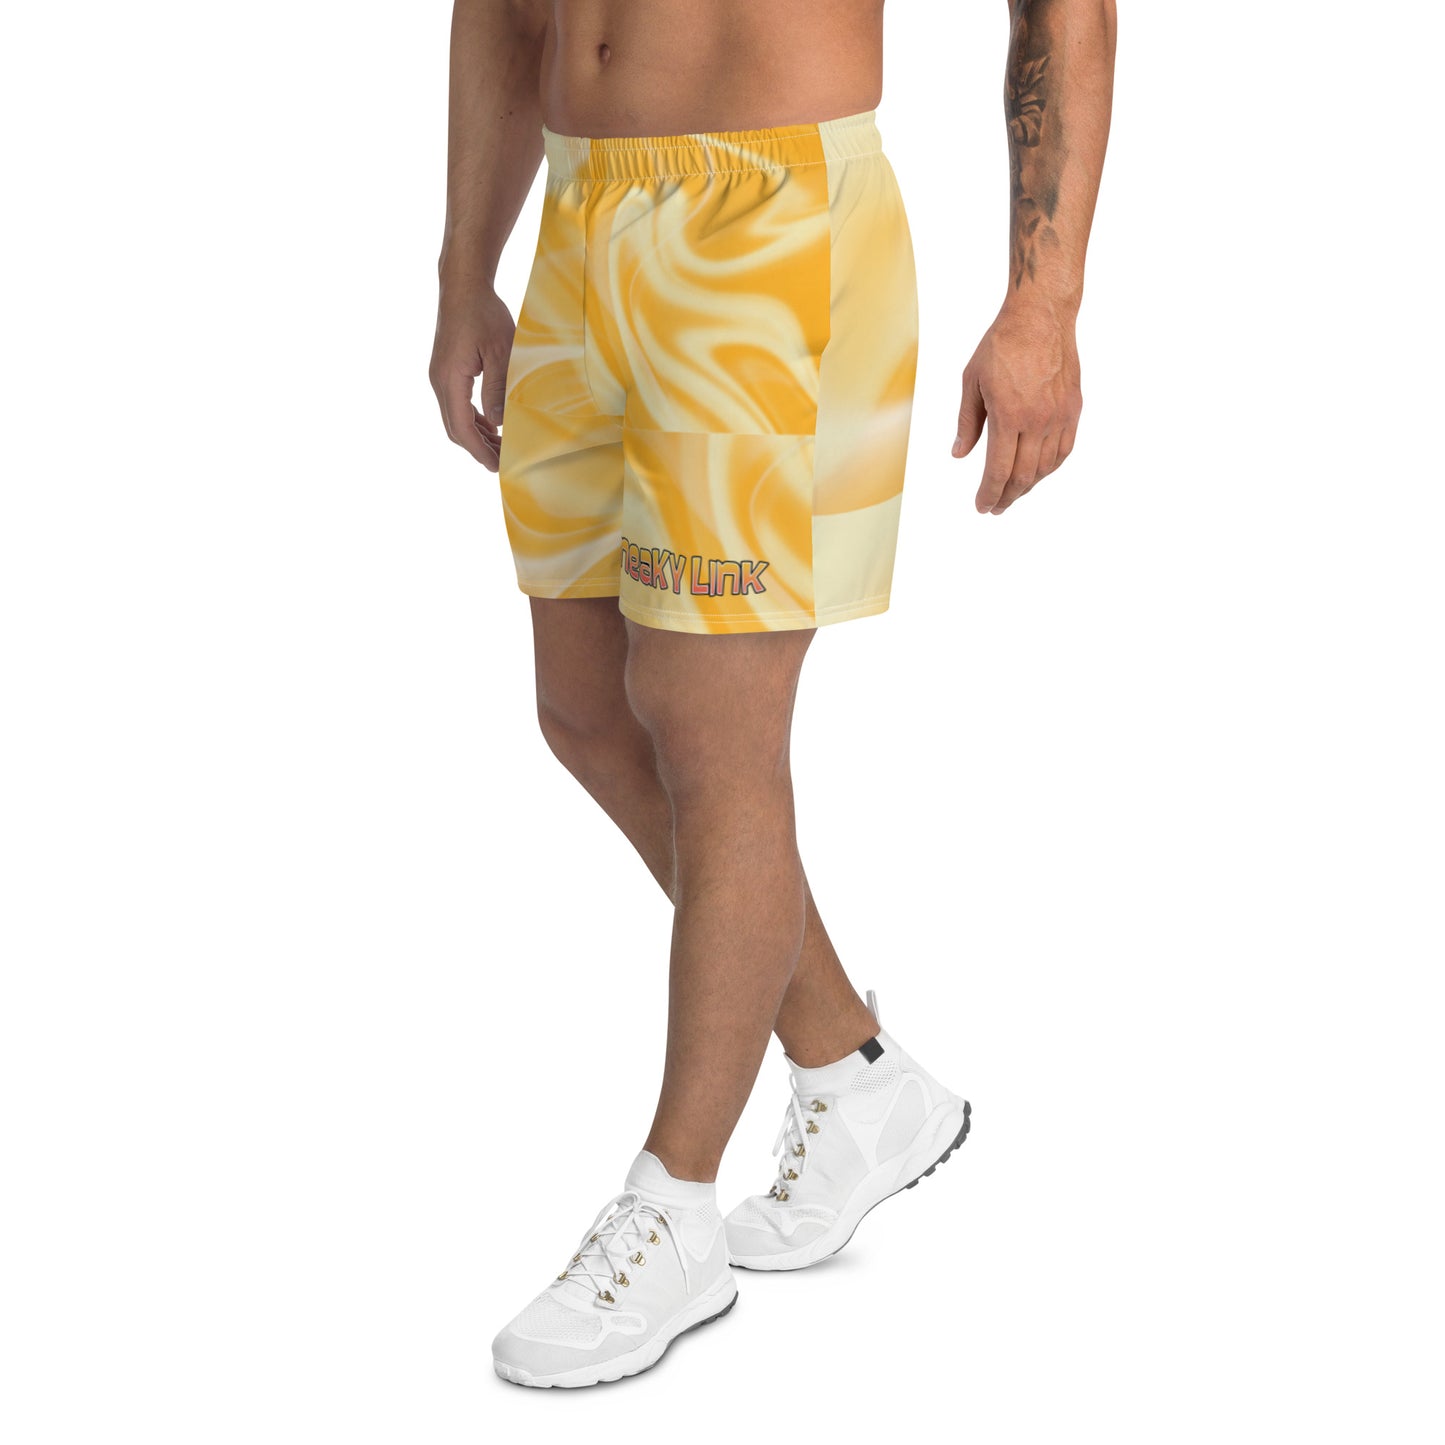 Sneaky-Link Men's Recycled Athletic Shorts